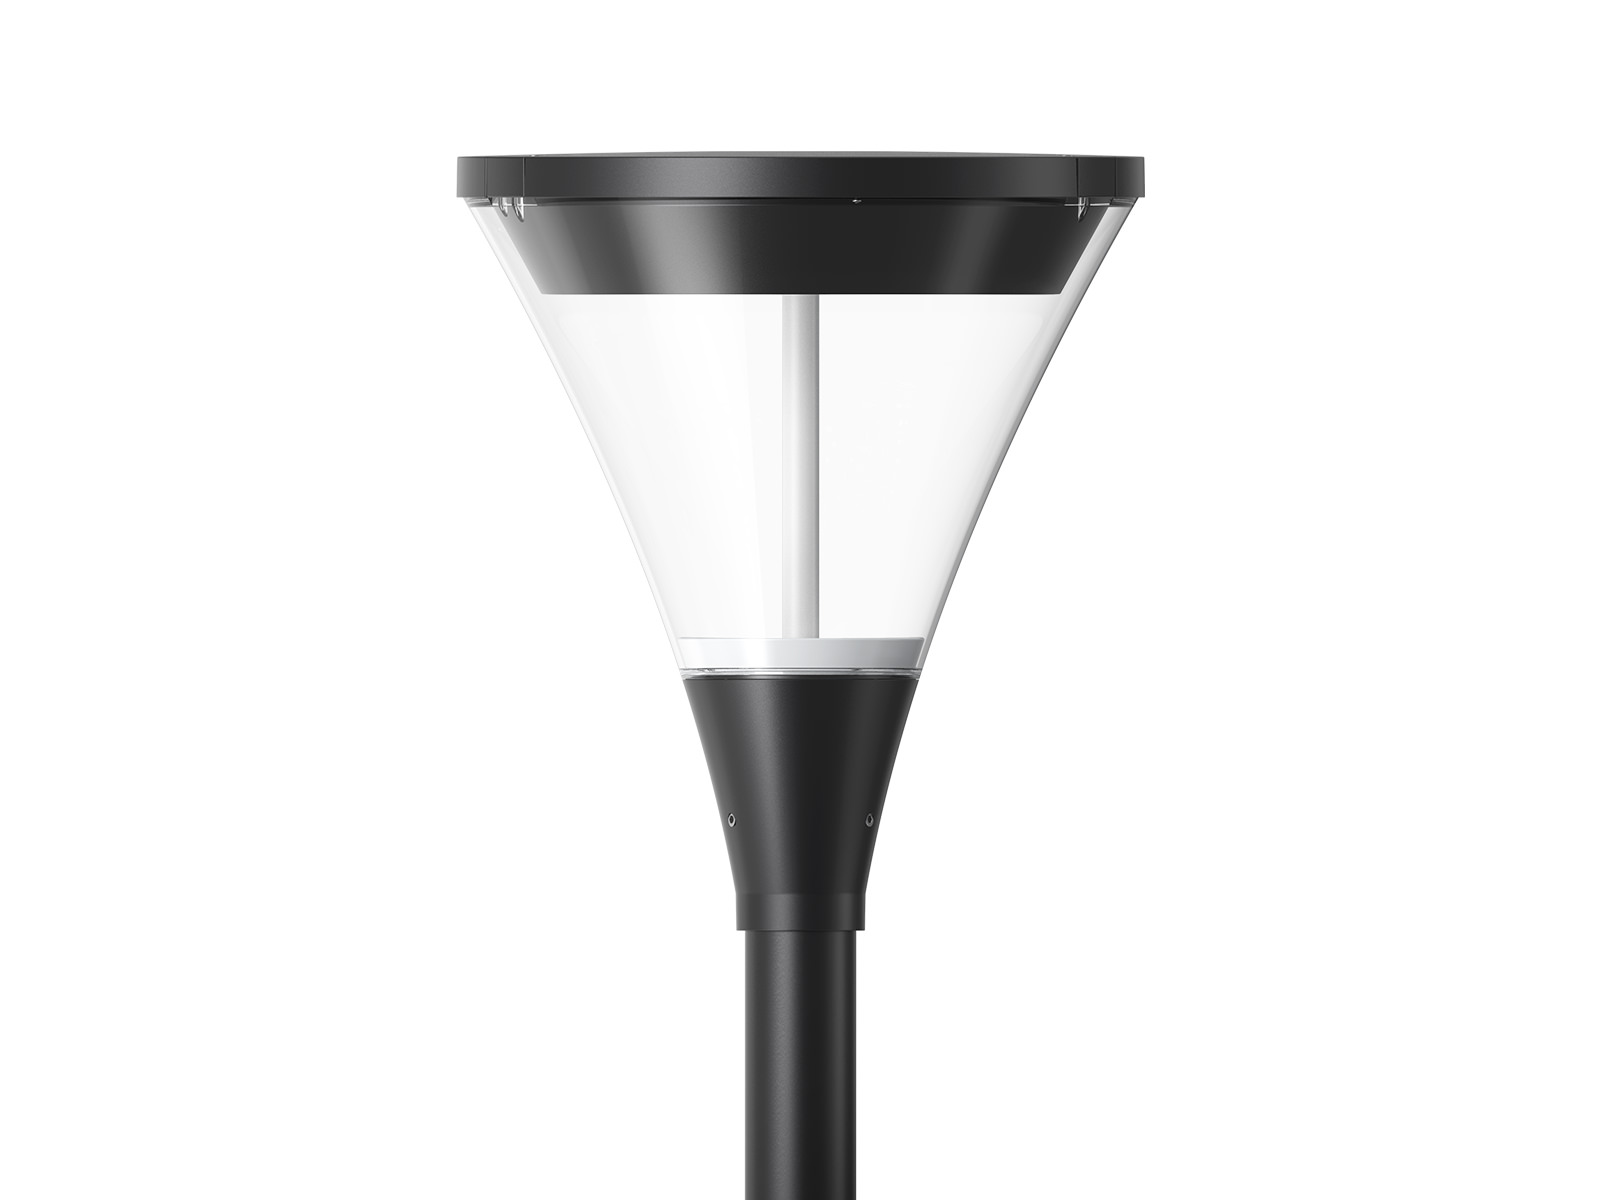 ST52 Baldr 360° Architectural Post Top Light with Direct and Indirect Lighting Options